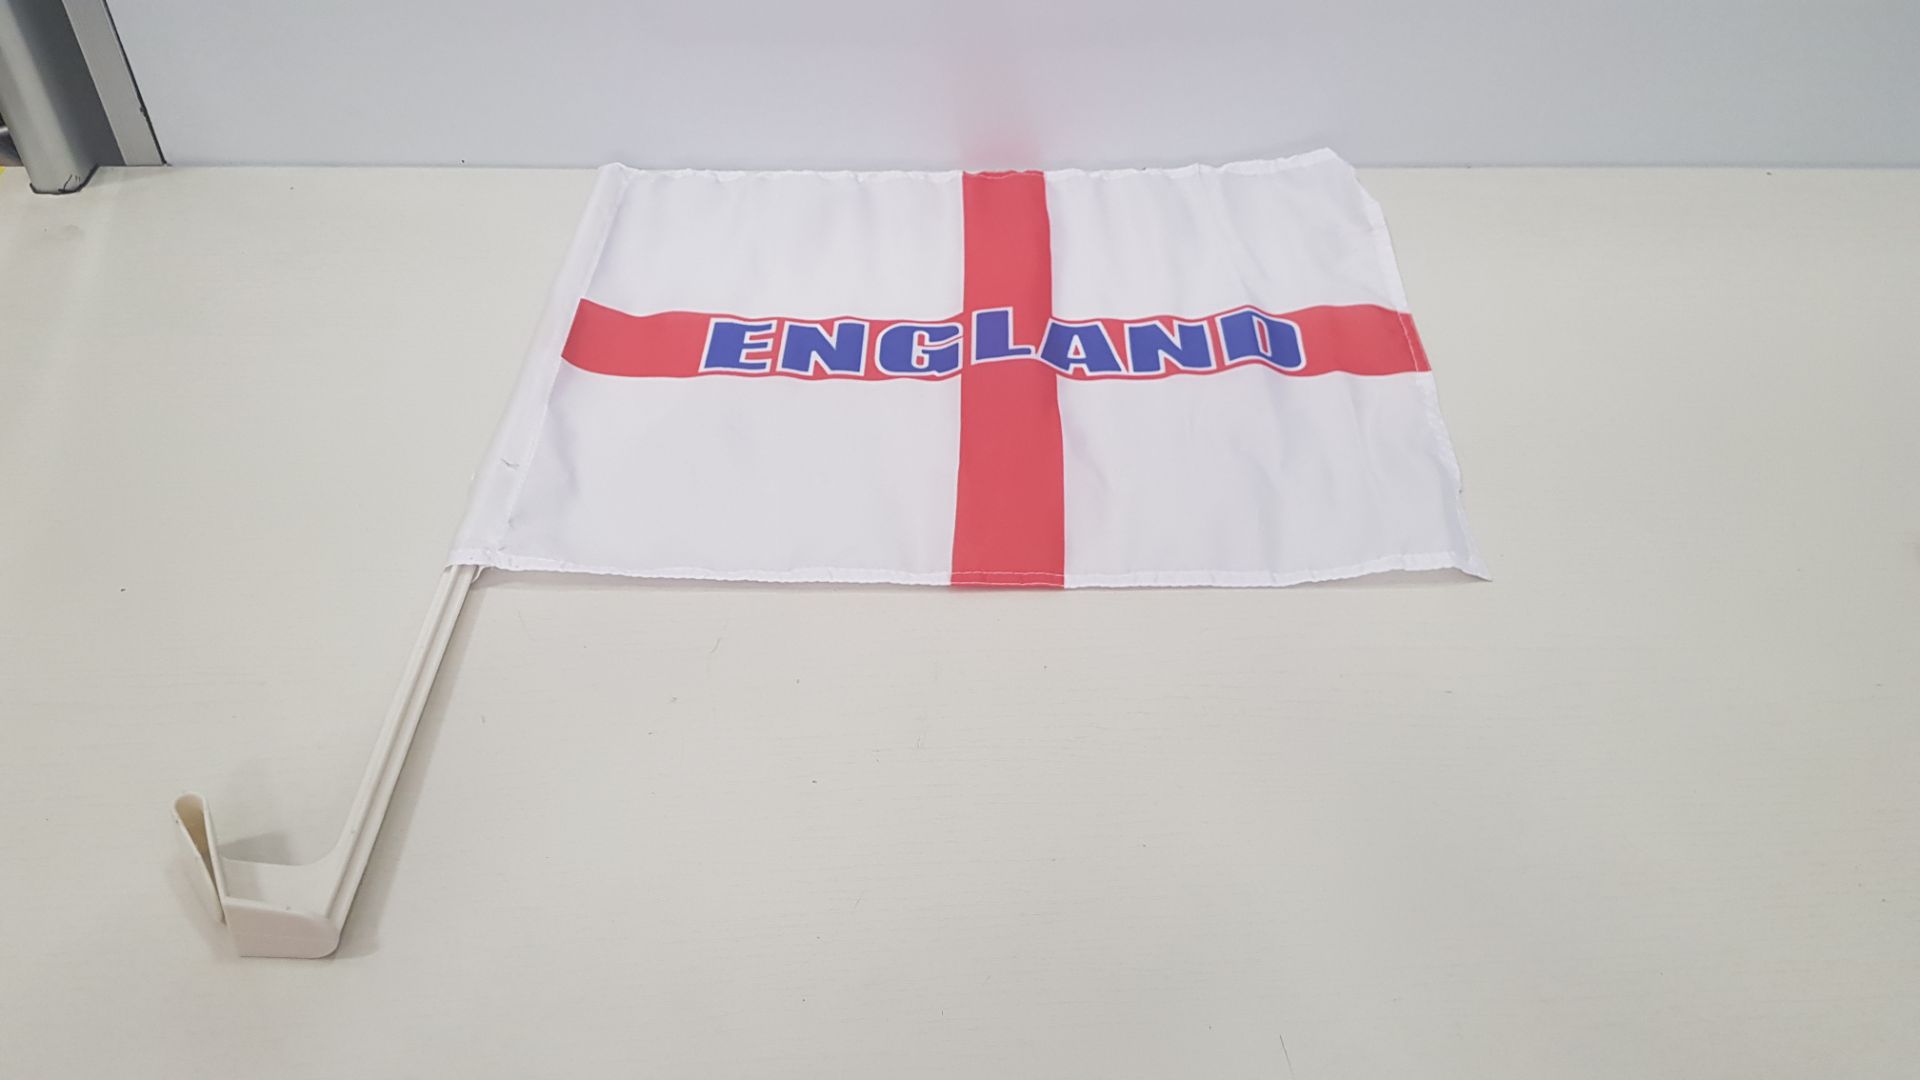 500 ENGLAND FLAGS TO ATTACH ON CAR (10 BOXES)